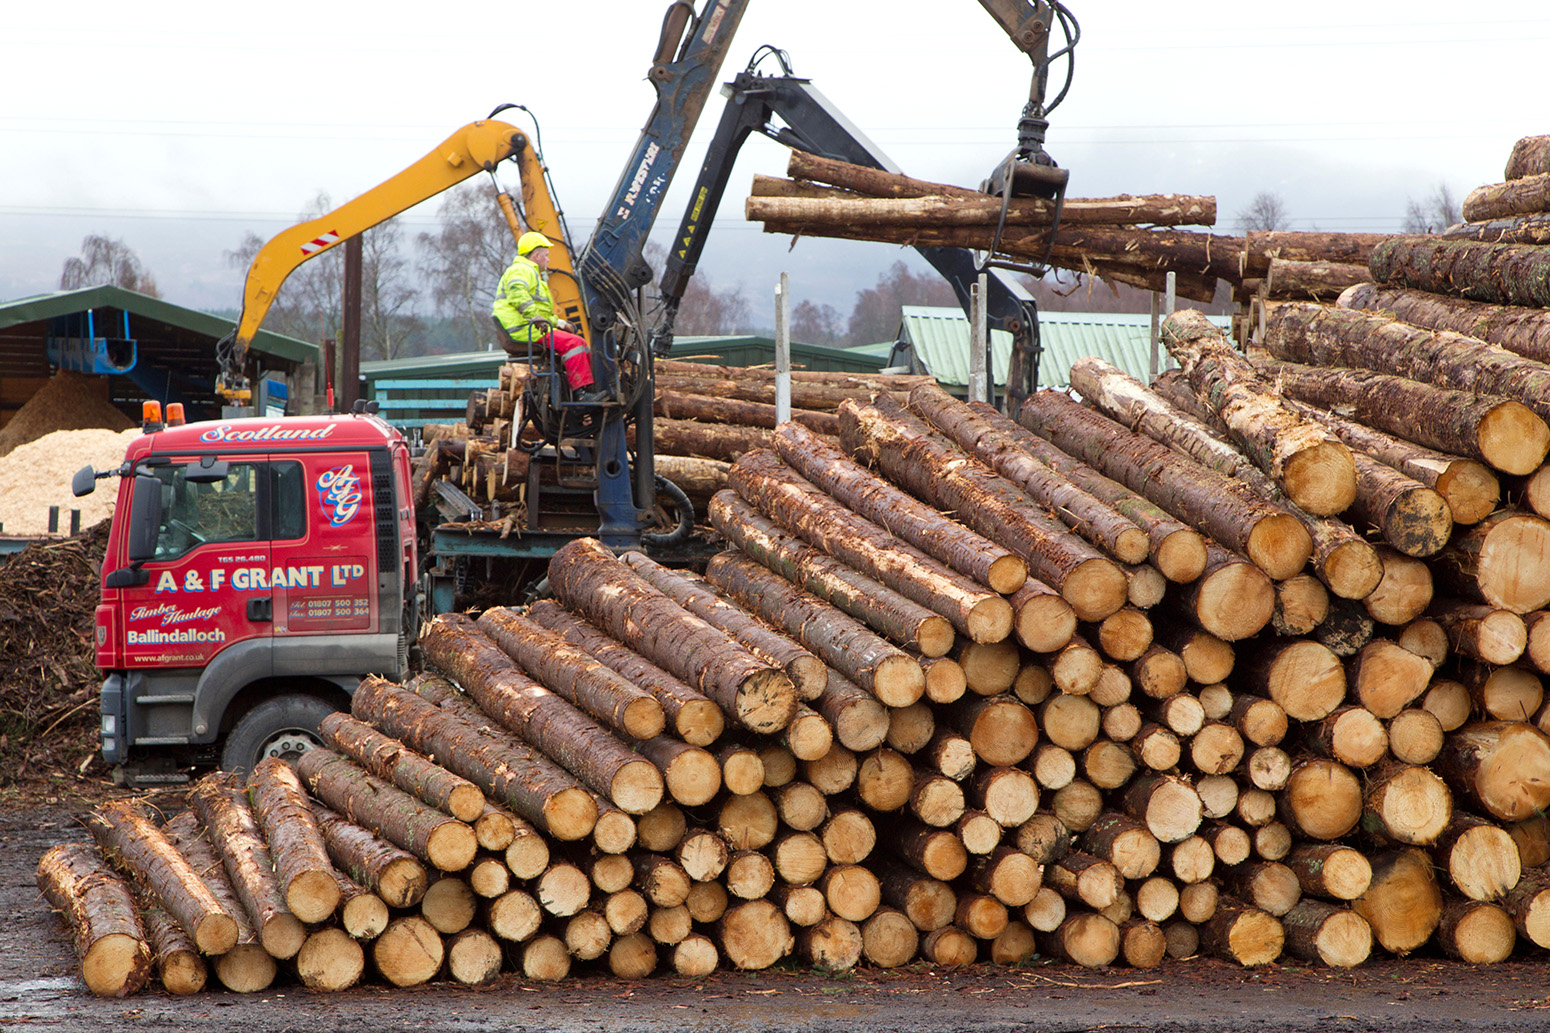 Processing spruce tree trunks at a sawmill, Inverness-shire, Scotland, UK. Credit: Nature Picture Library / Alamy Stock Photo. W7MRYN